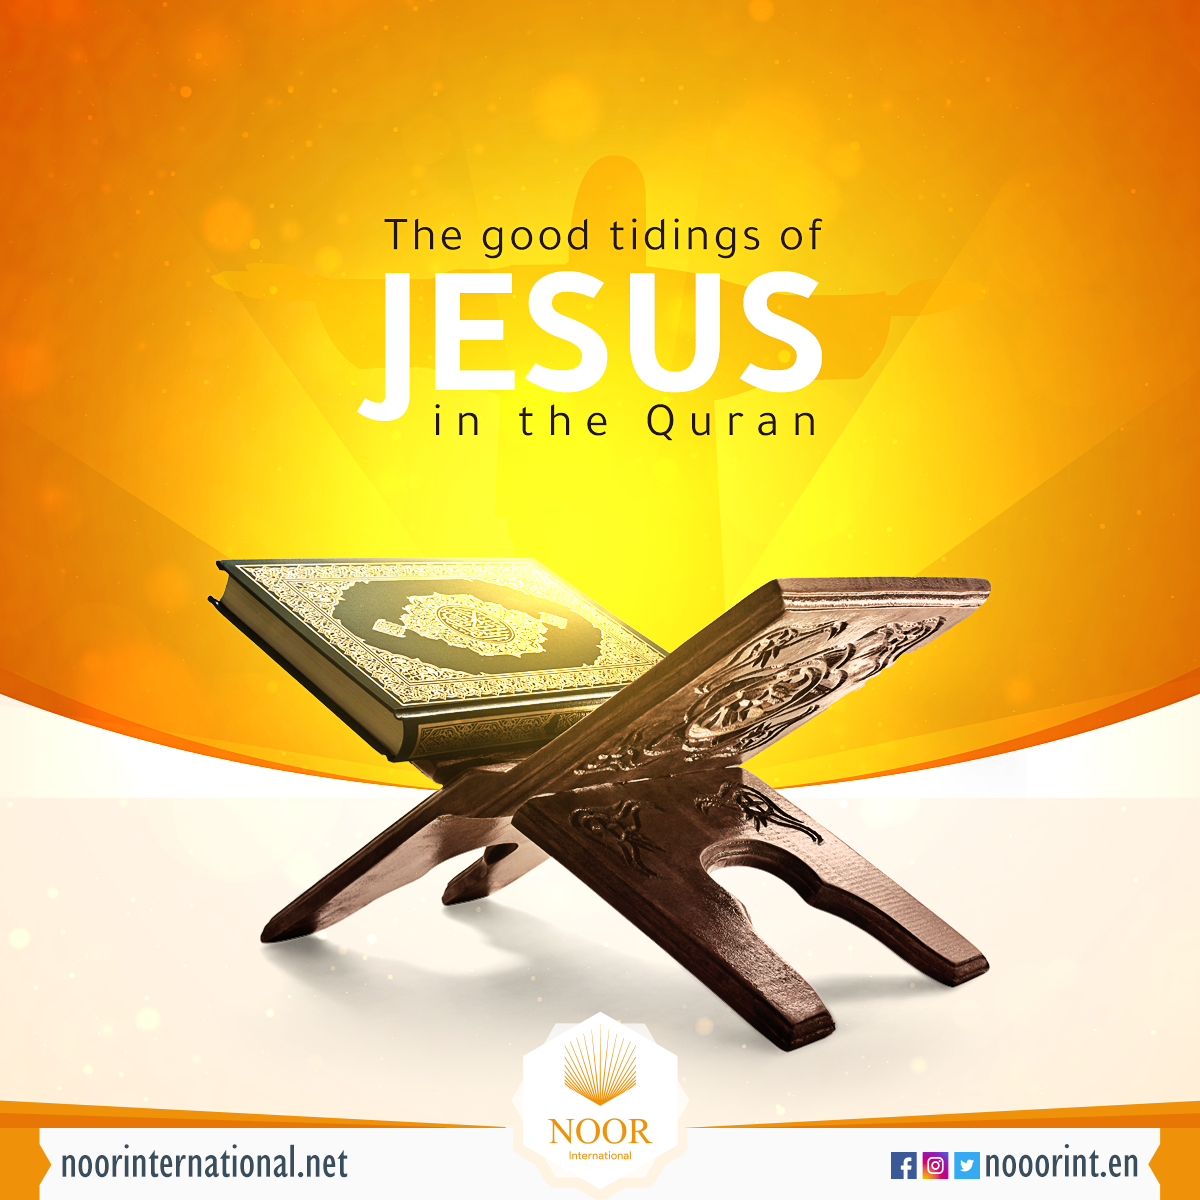 The good tidings of the Christ in the Quran